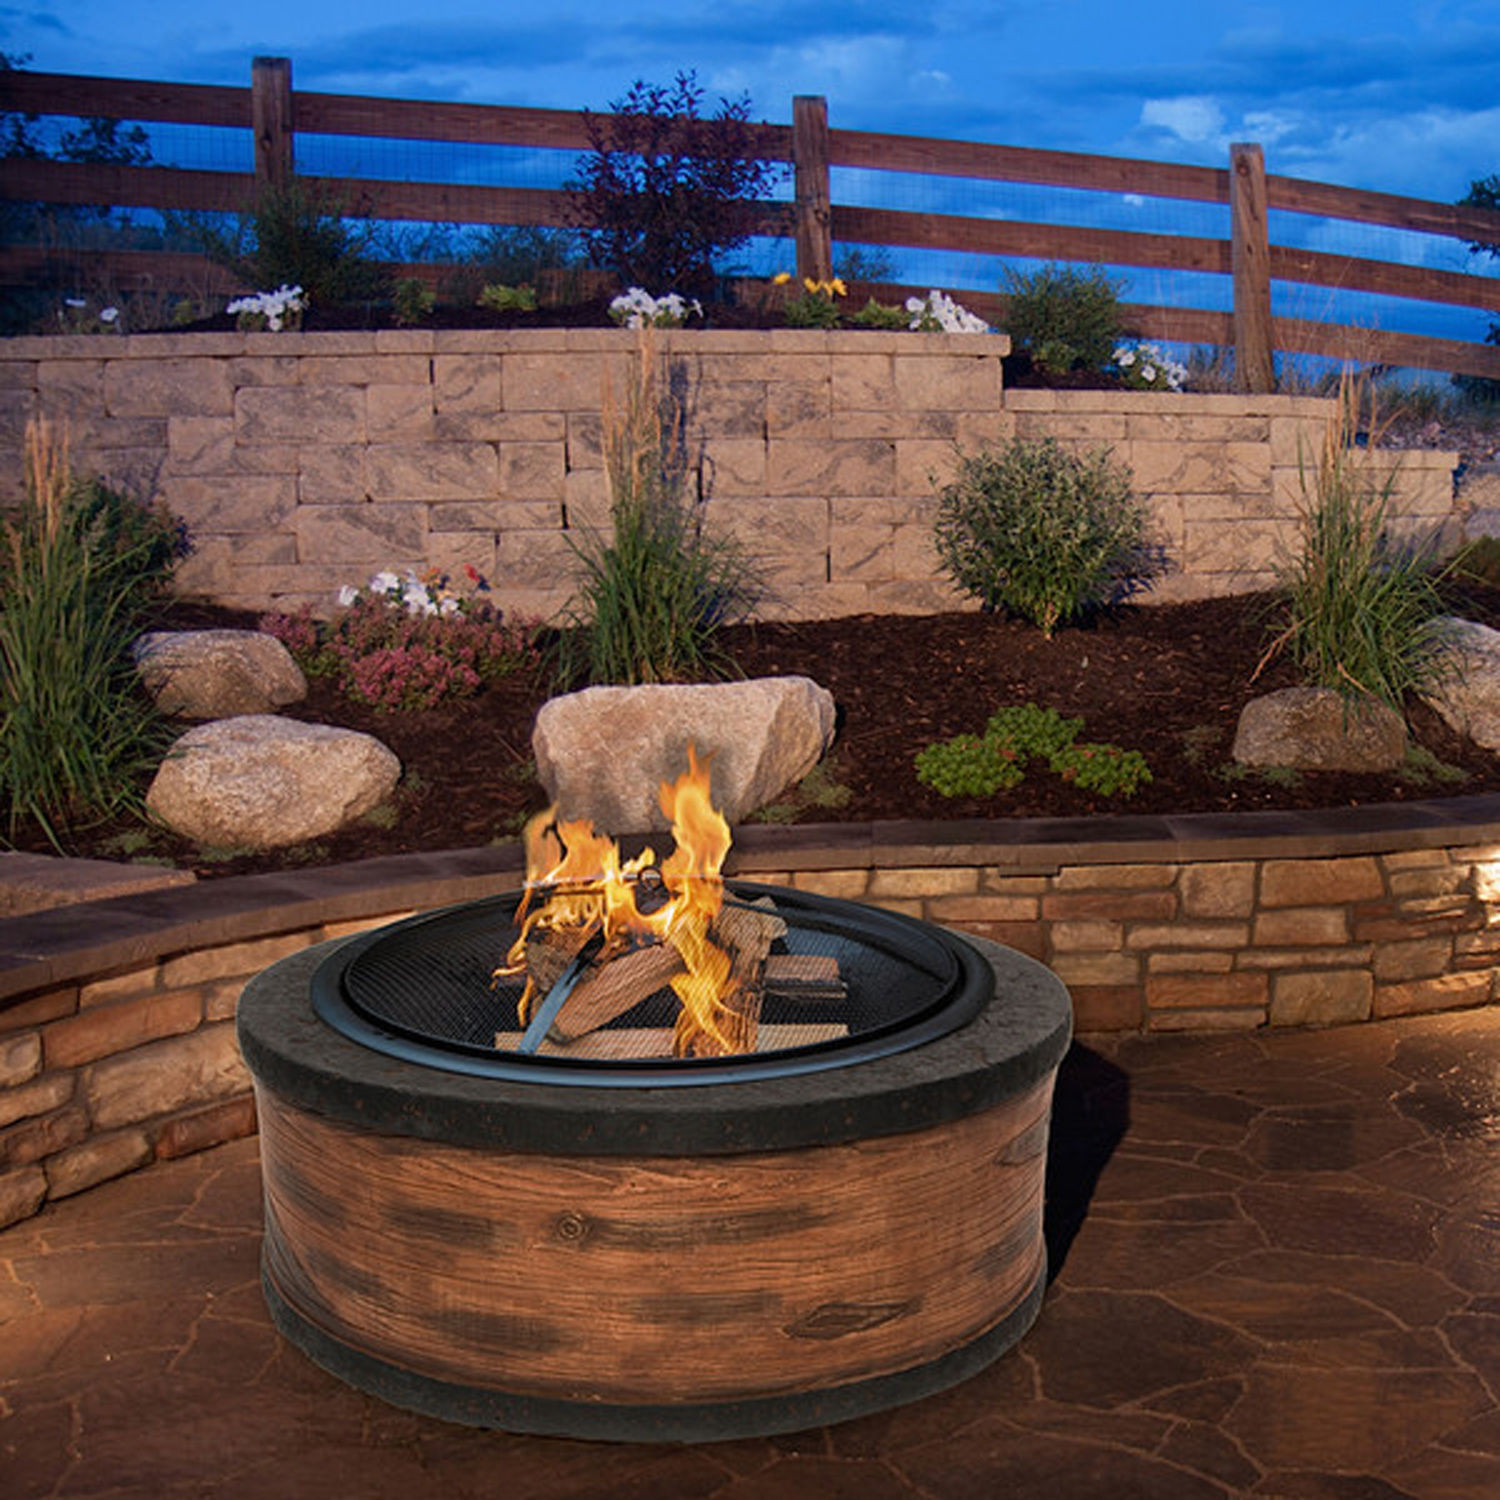 Outdoor Fire Pit Patio
 Round Fire Pit Wood Burning Fireplace Outdoor Patio Garden